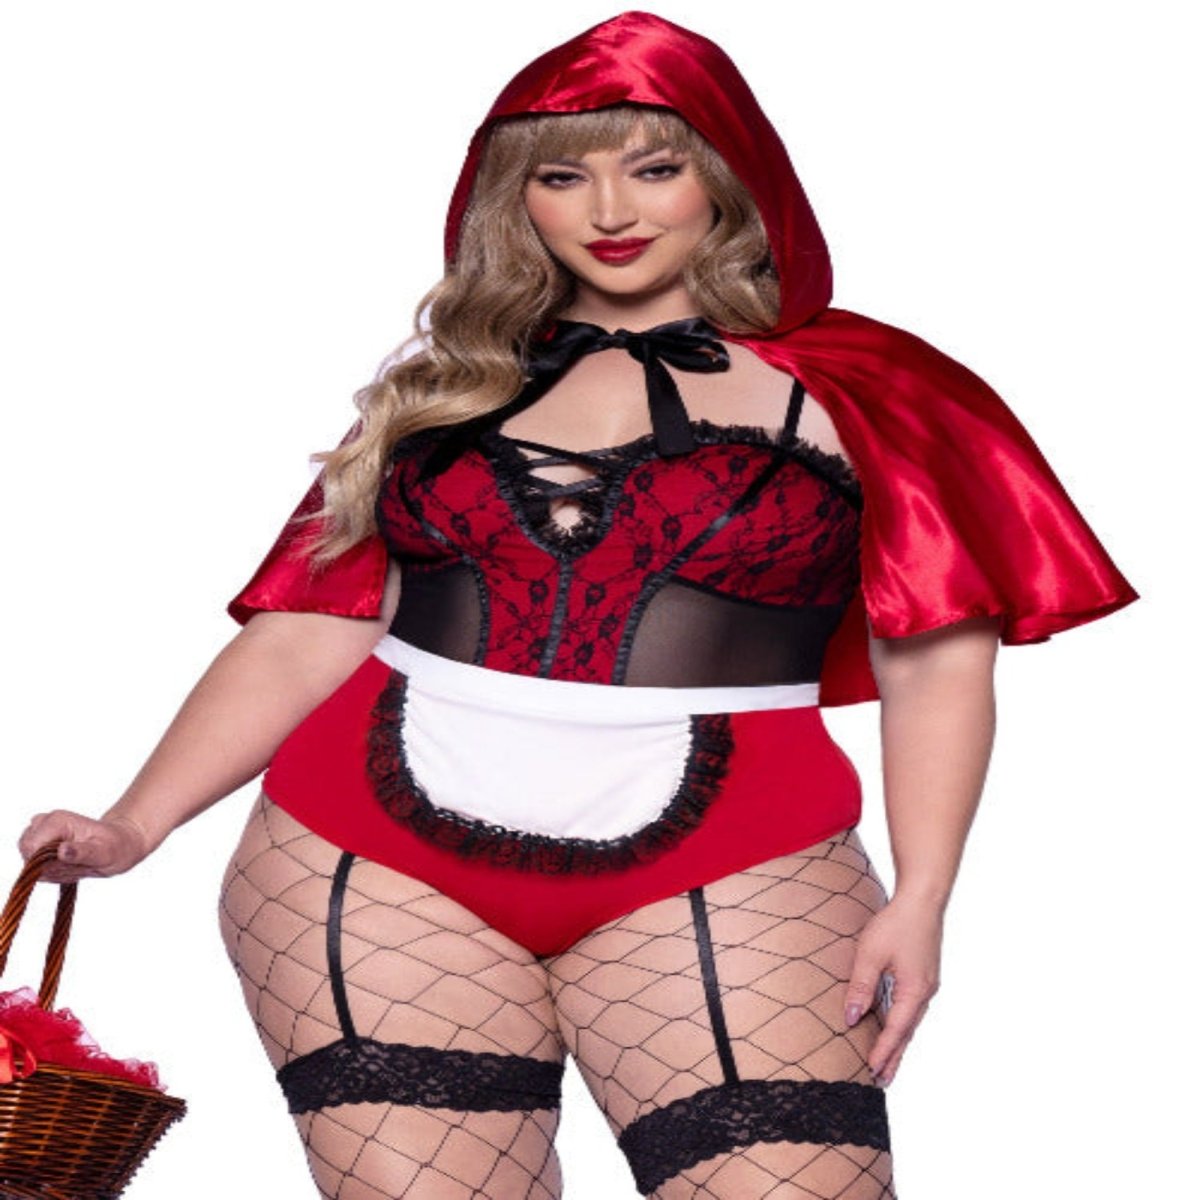 Naughty Miss Red Riding Hood Costume - worldclasscostumes